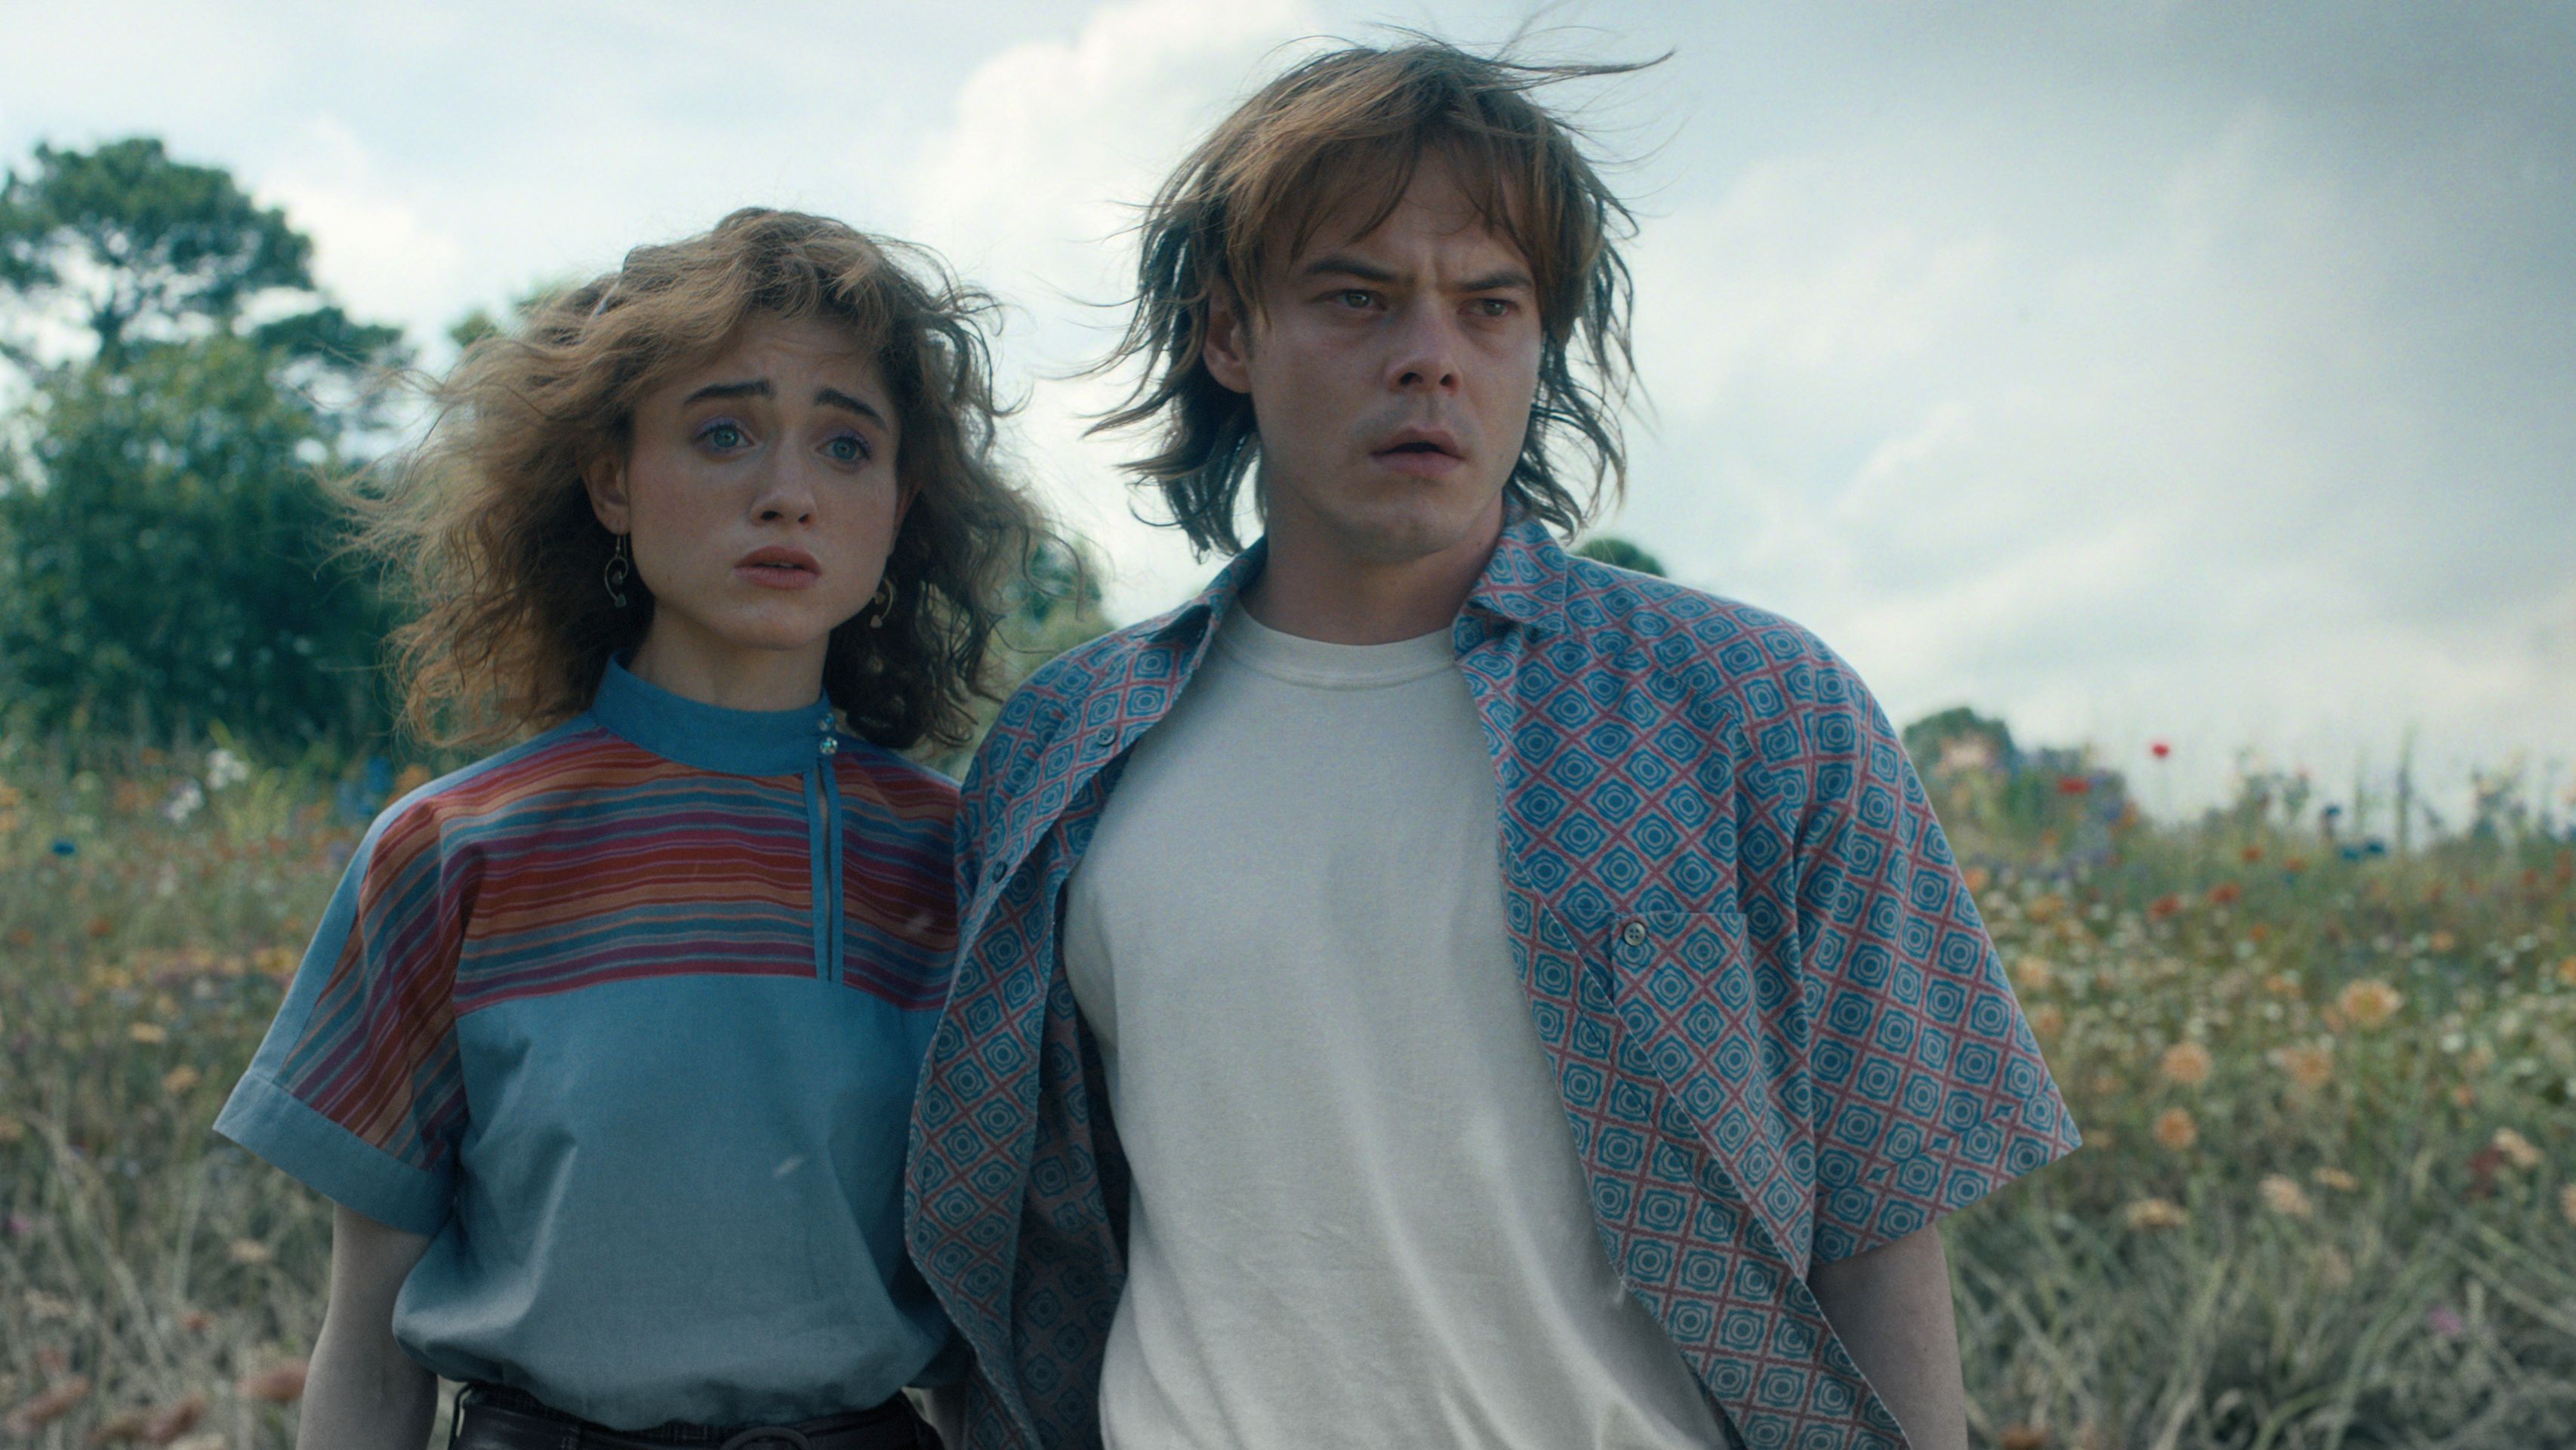 Stranger Things' Season 5: Will Gets to Come Into His Own